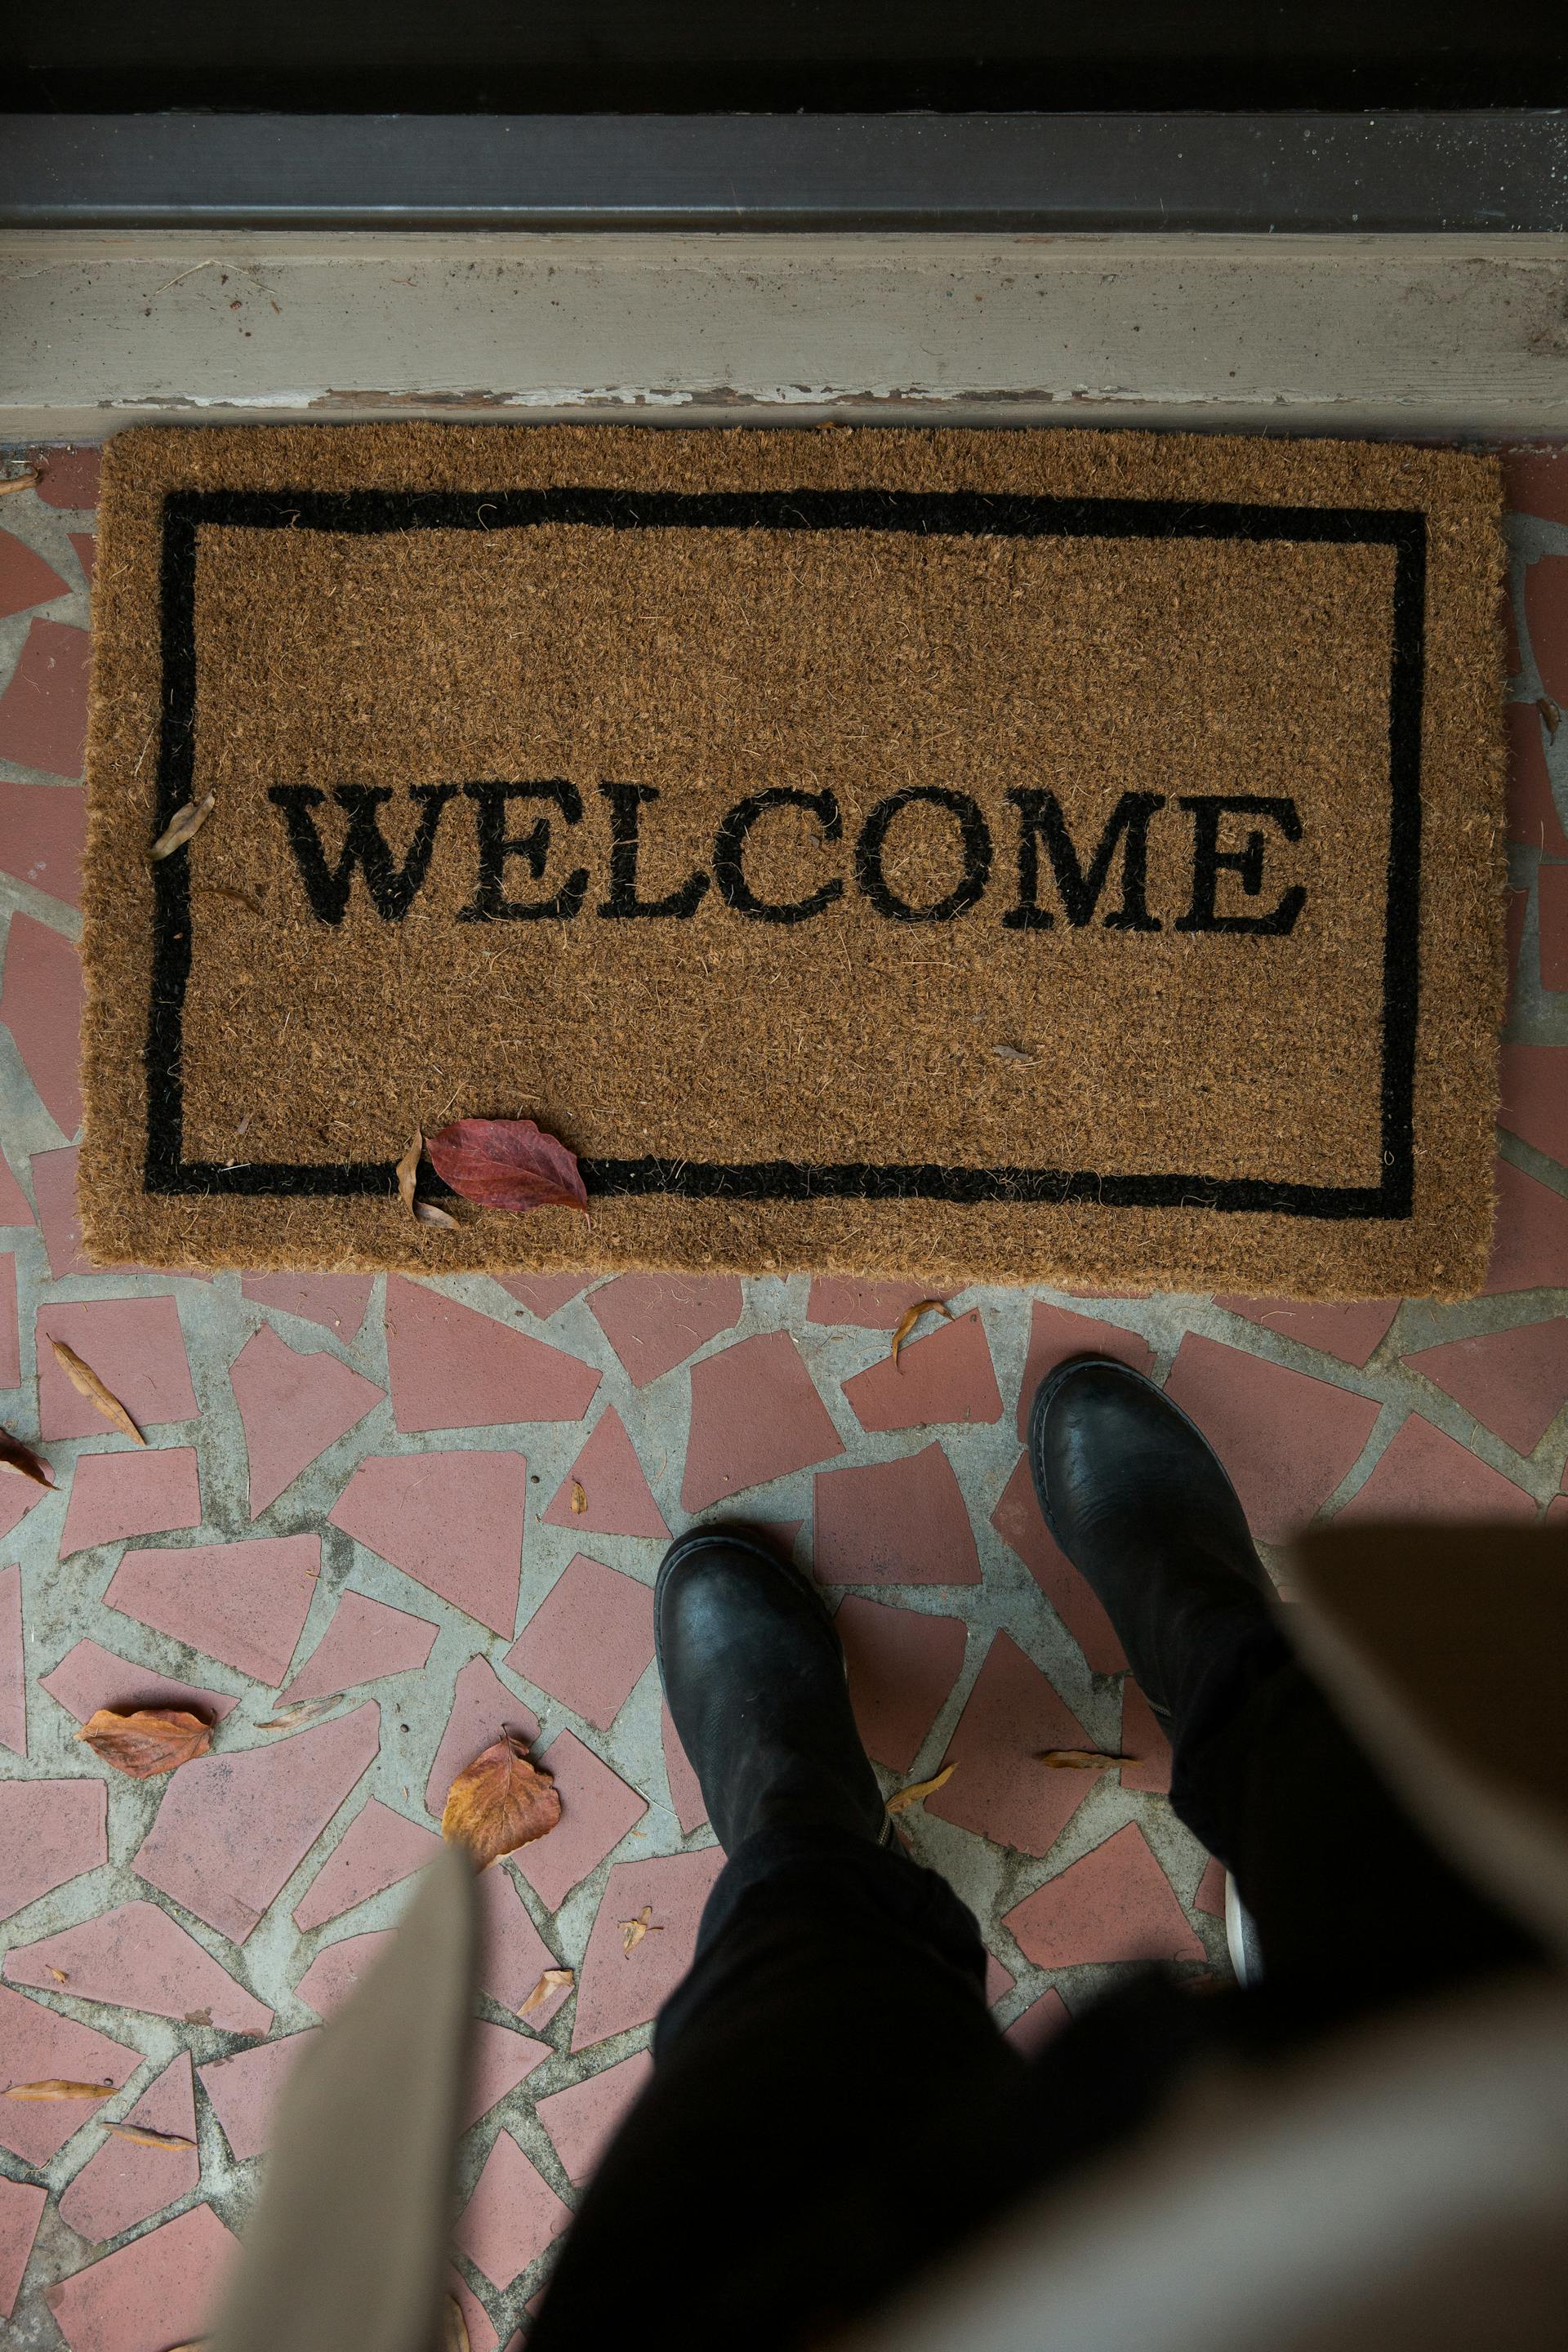 A person standing at a welcome mat | Source: Pexels